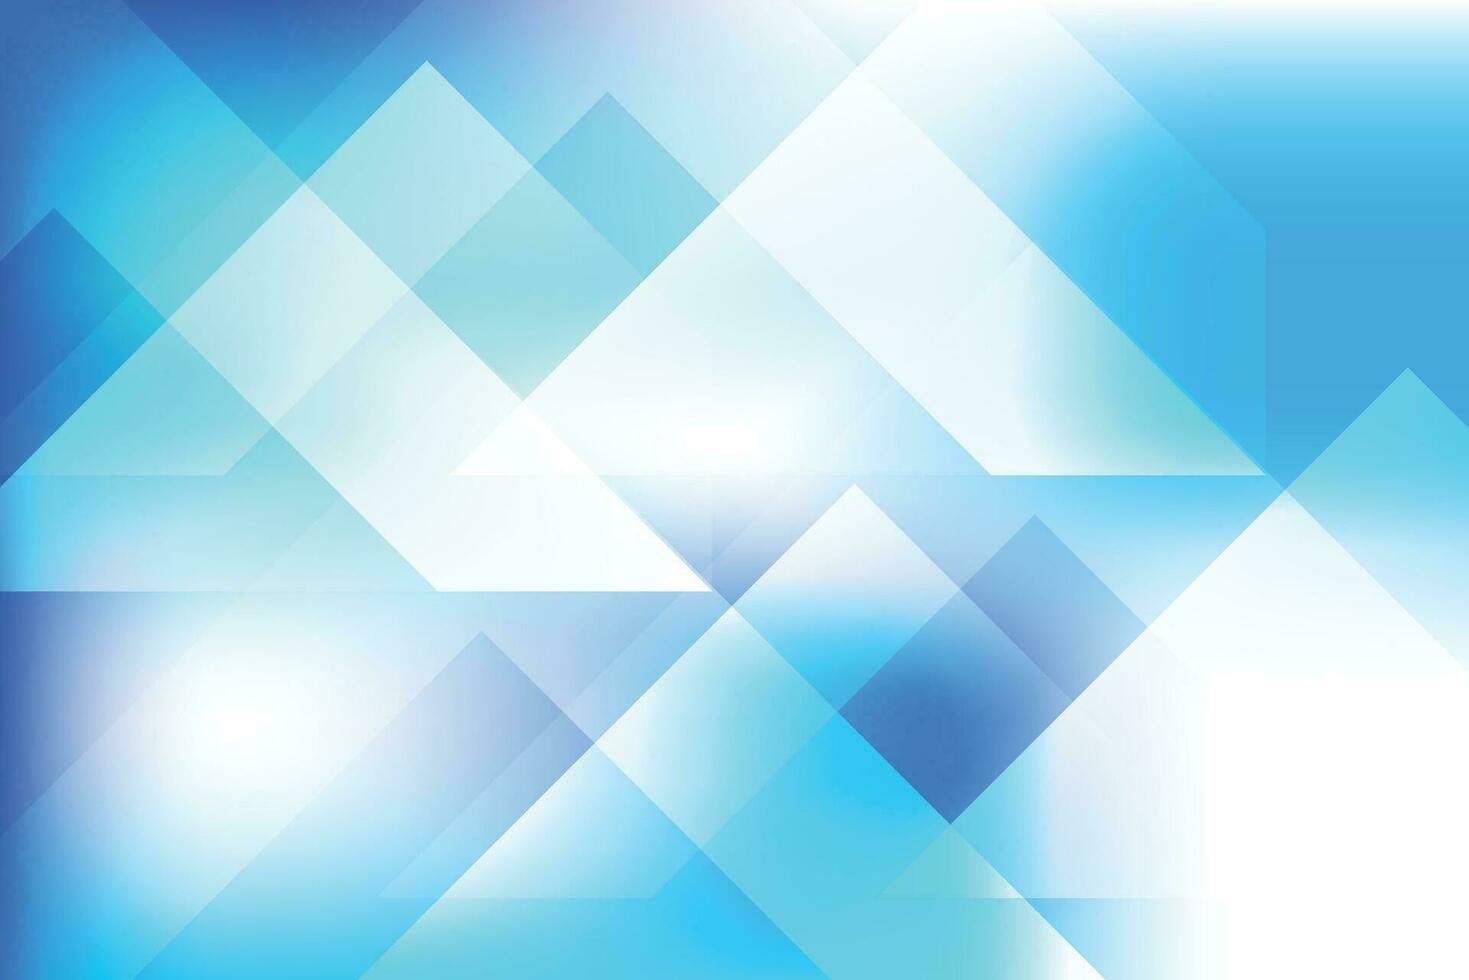 Blue dynamic shadow line stock photos image guardian bright colourful cool abstract background vector